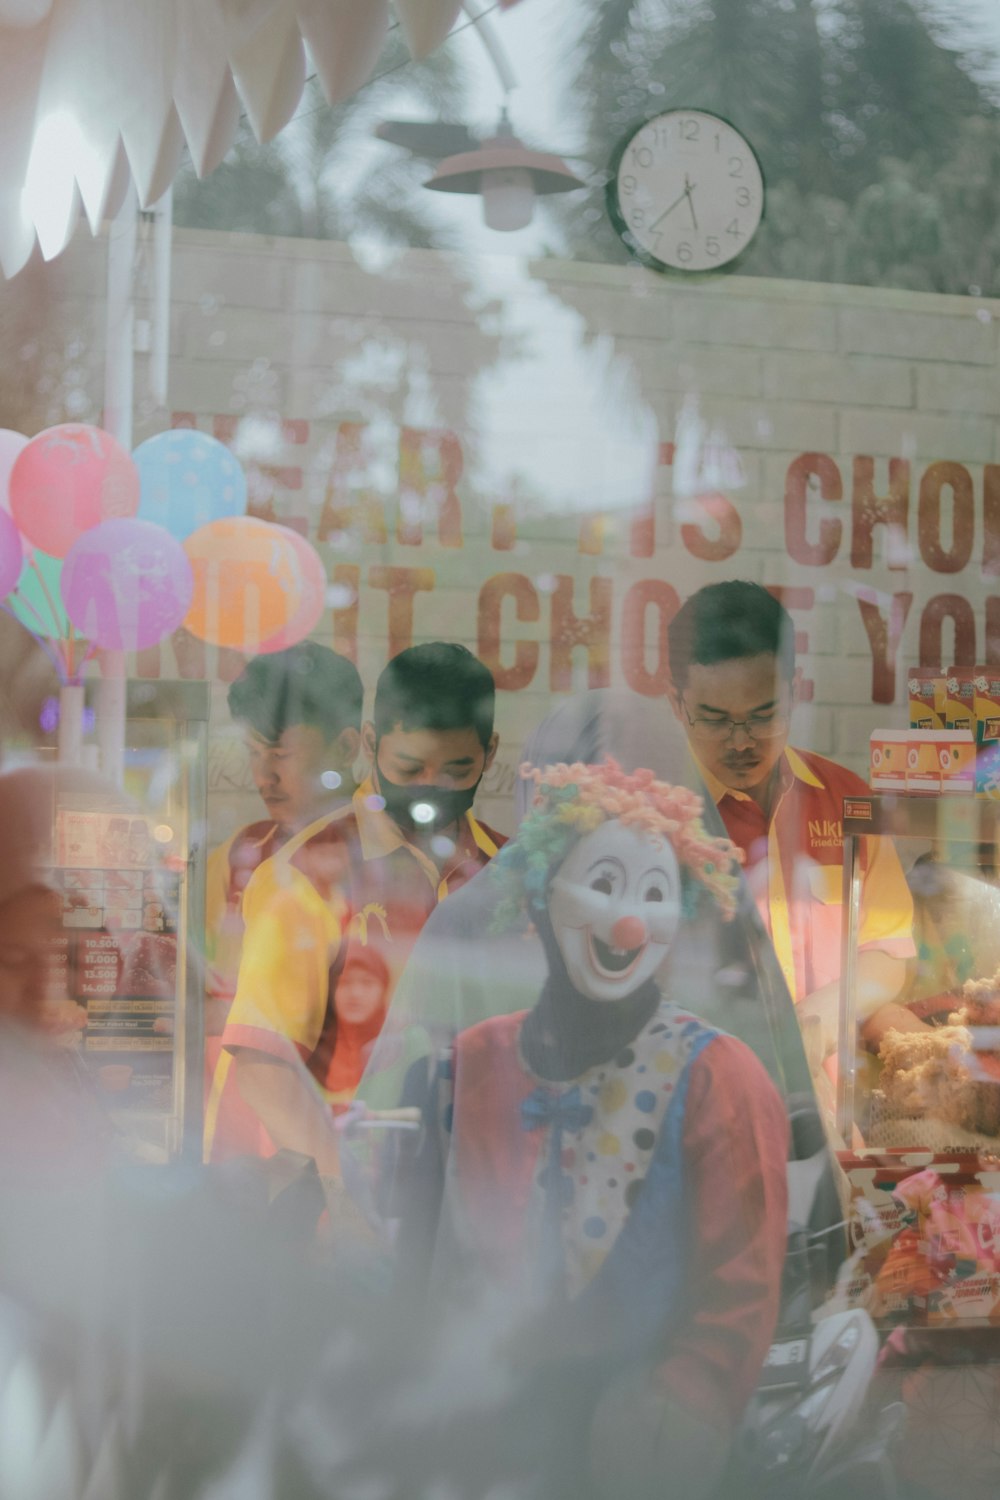 a group of clowns standing in front of a store window